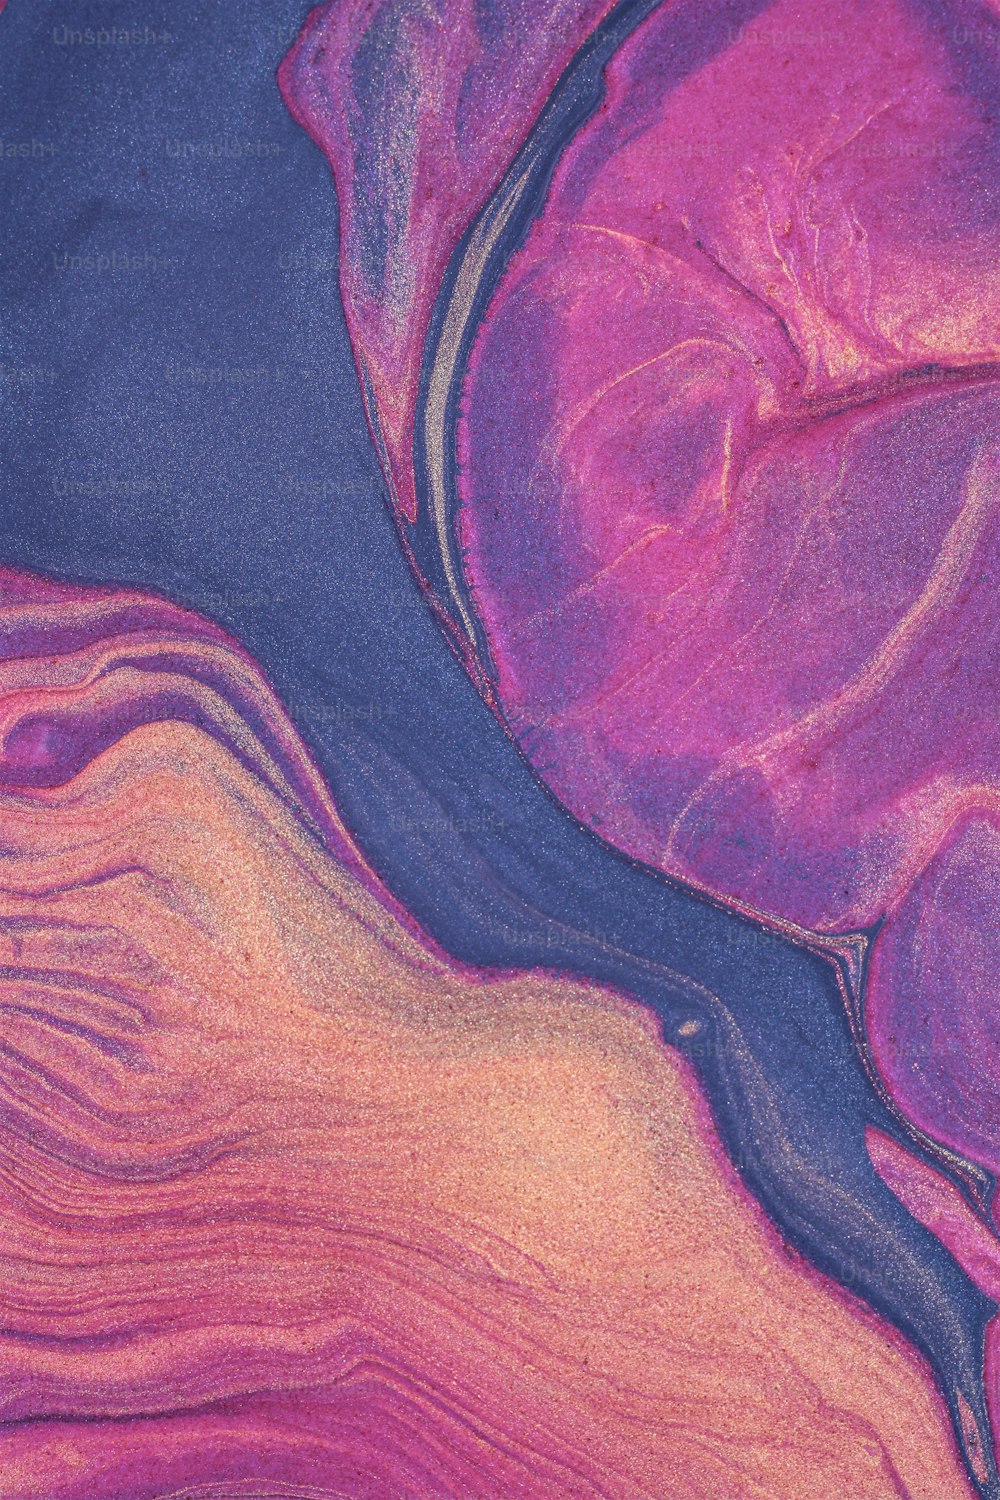 a close up of a pink and purple substance